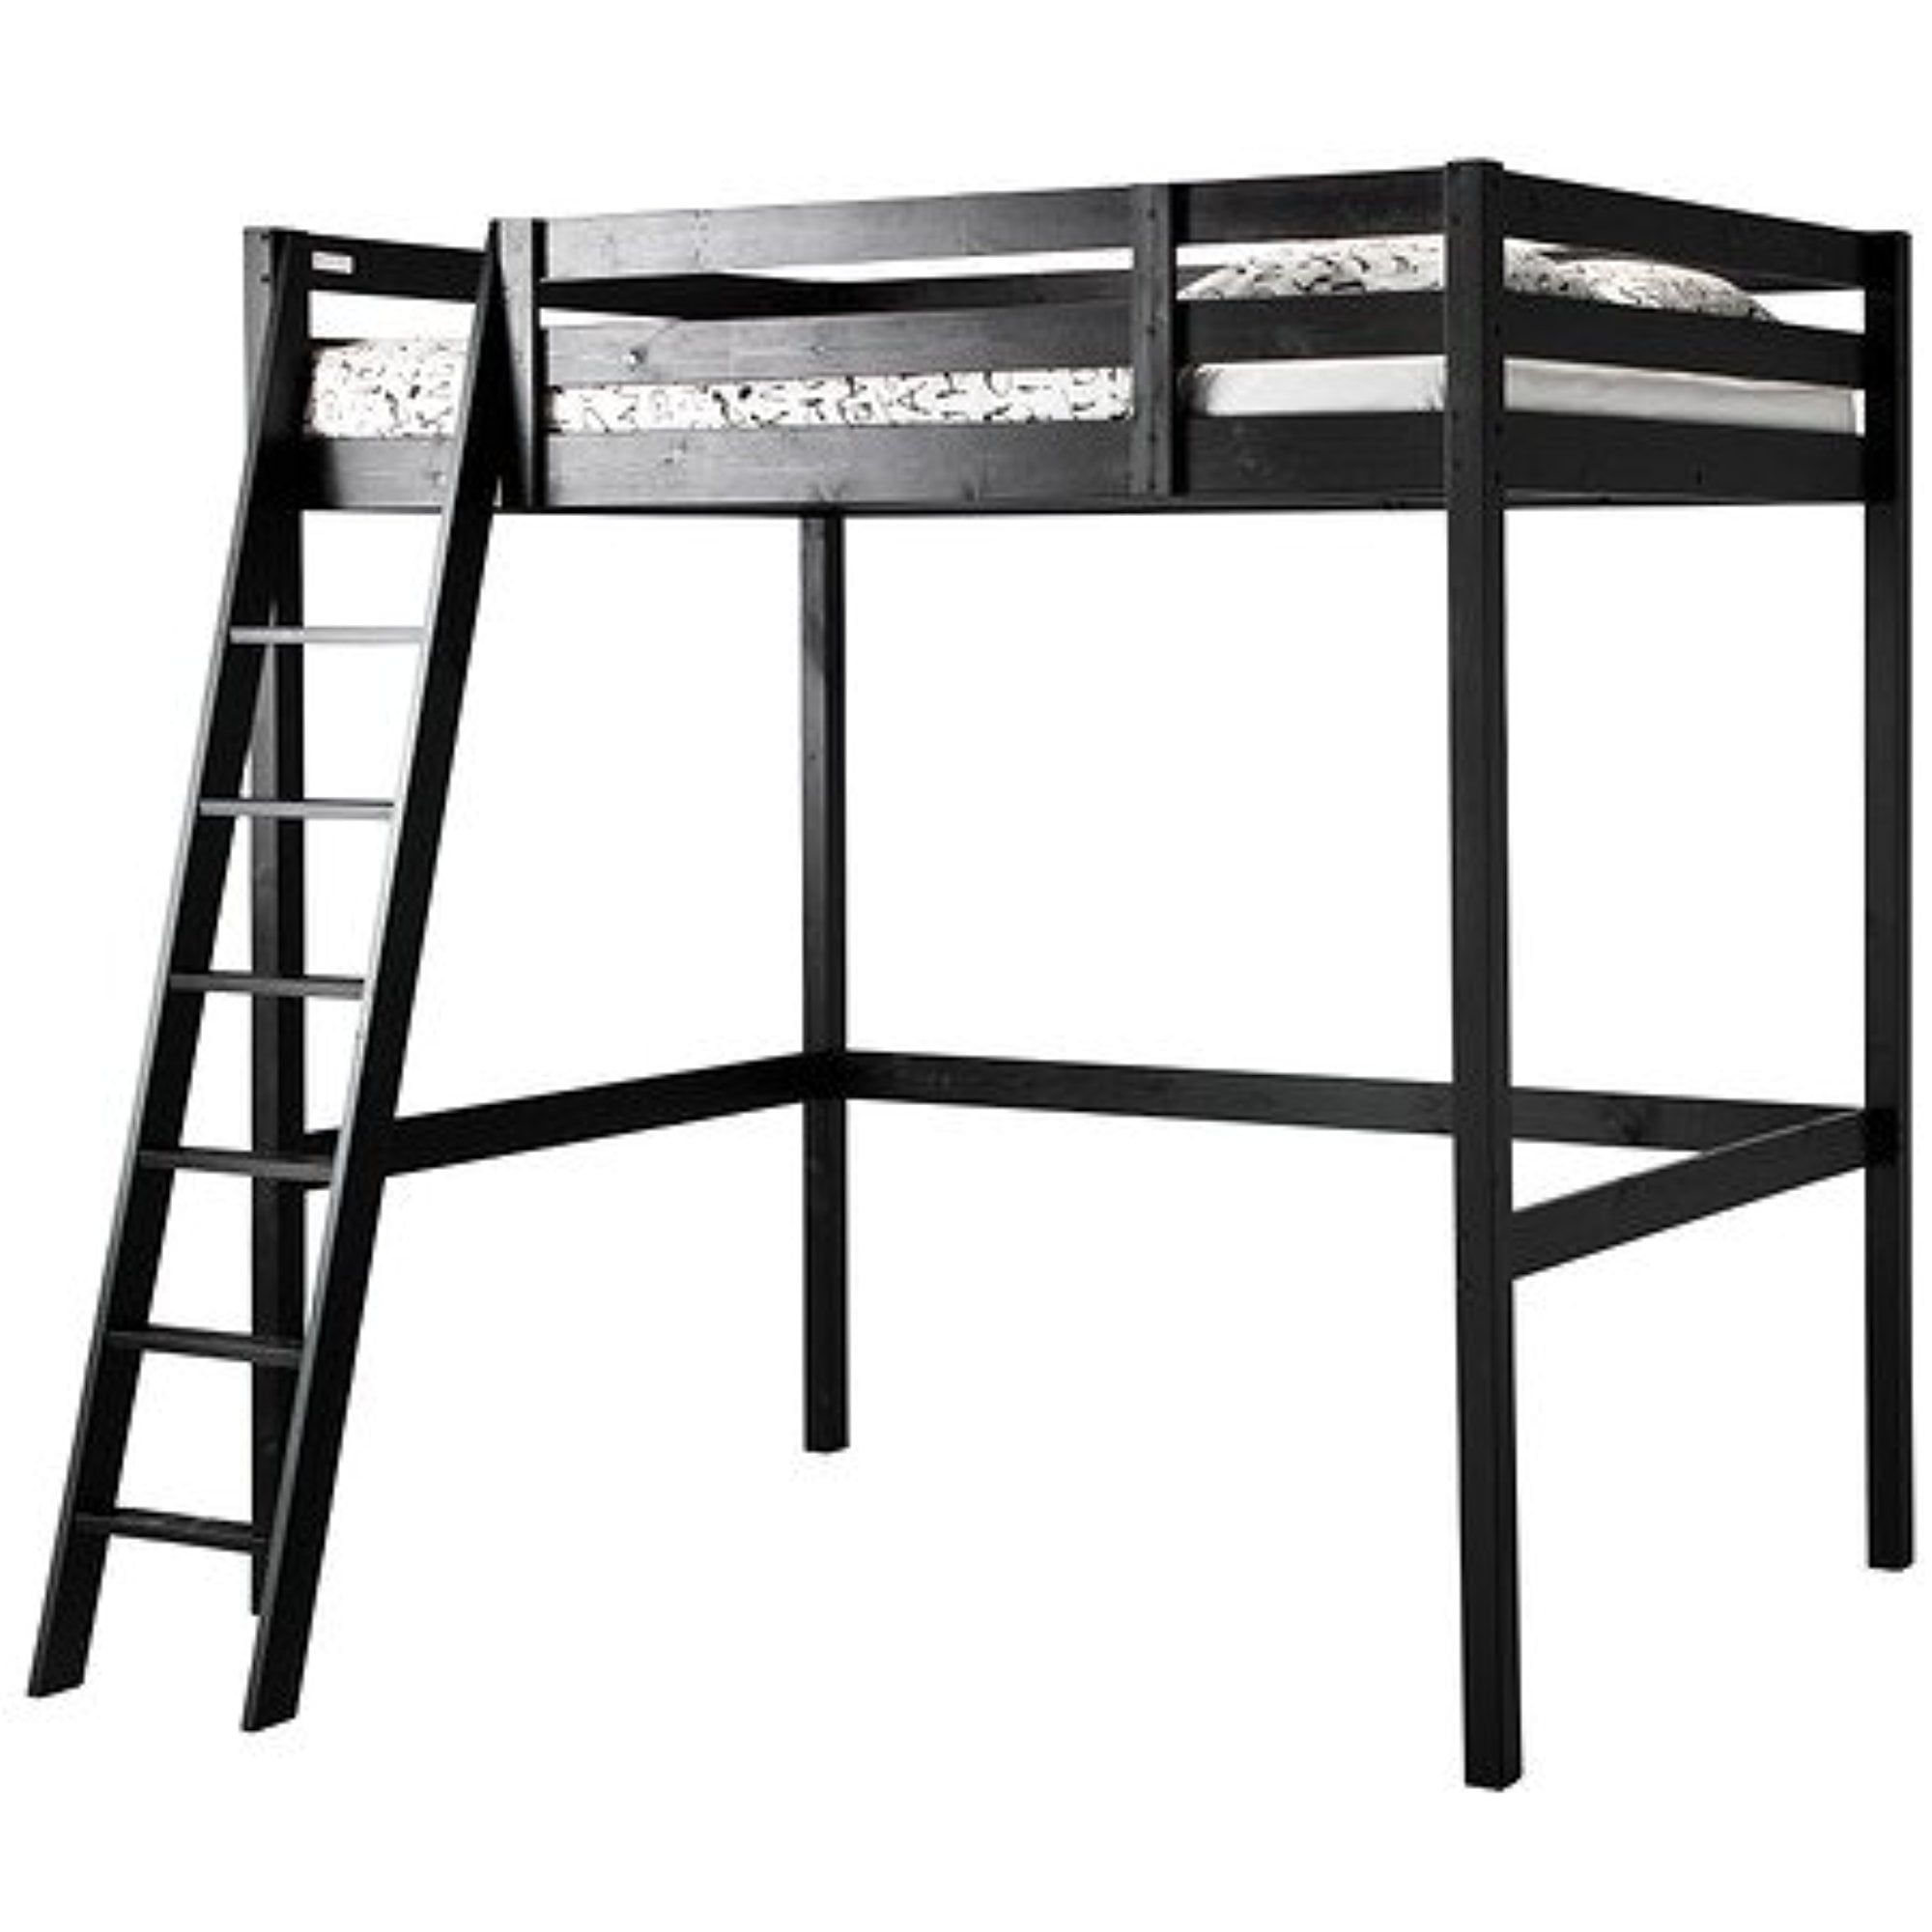 Ikea Full Double Size Loft Bed Frame, What Is The Weight Limit On Ikea Loft Bed